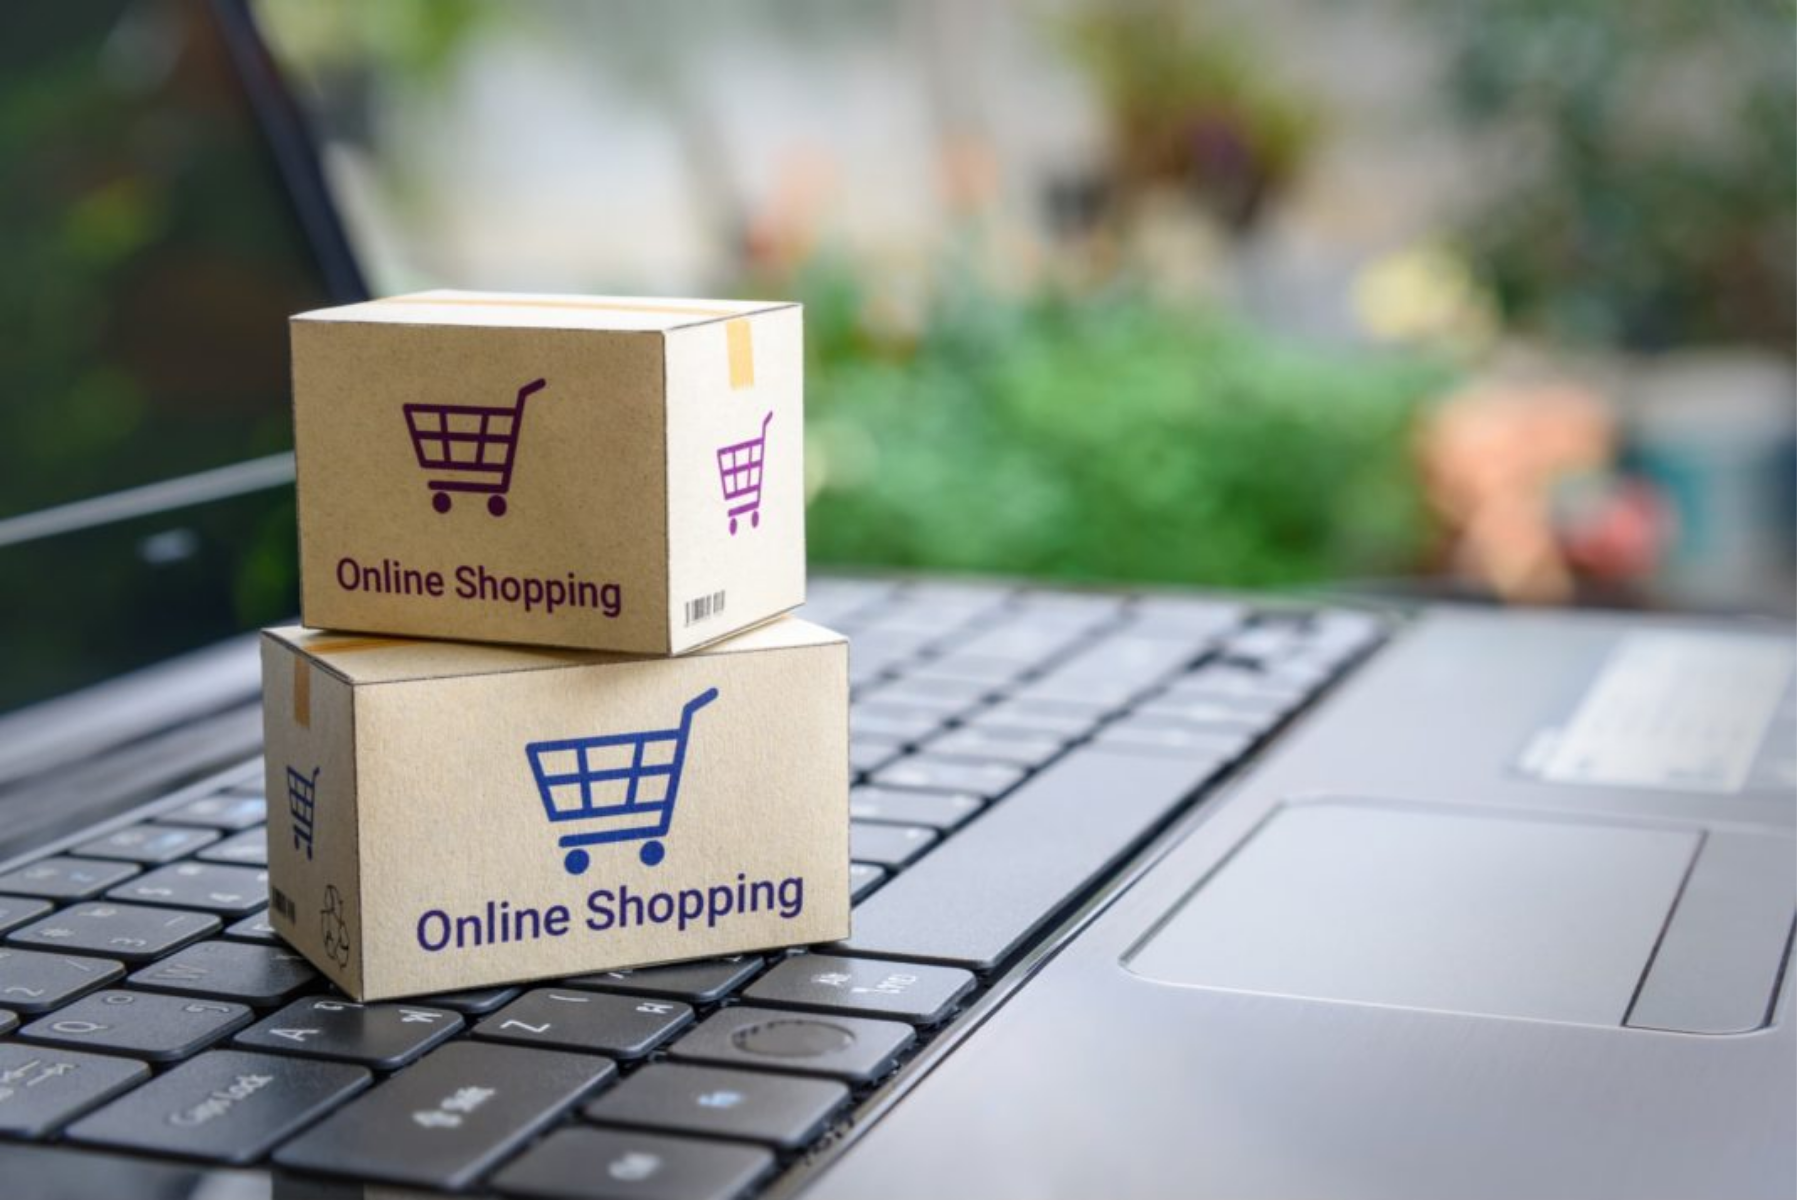 Best Apps For Online Shoppers - A New Way To Shop Without Putting In Too Much Effort